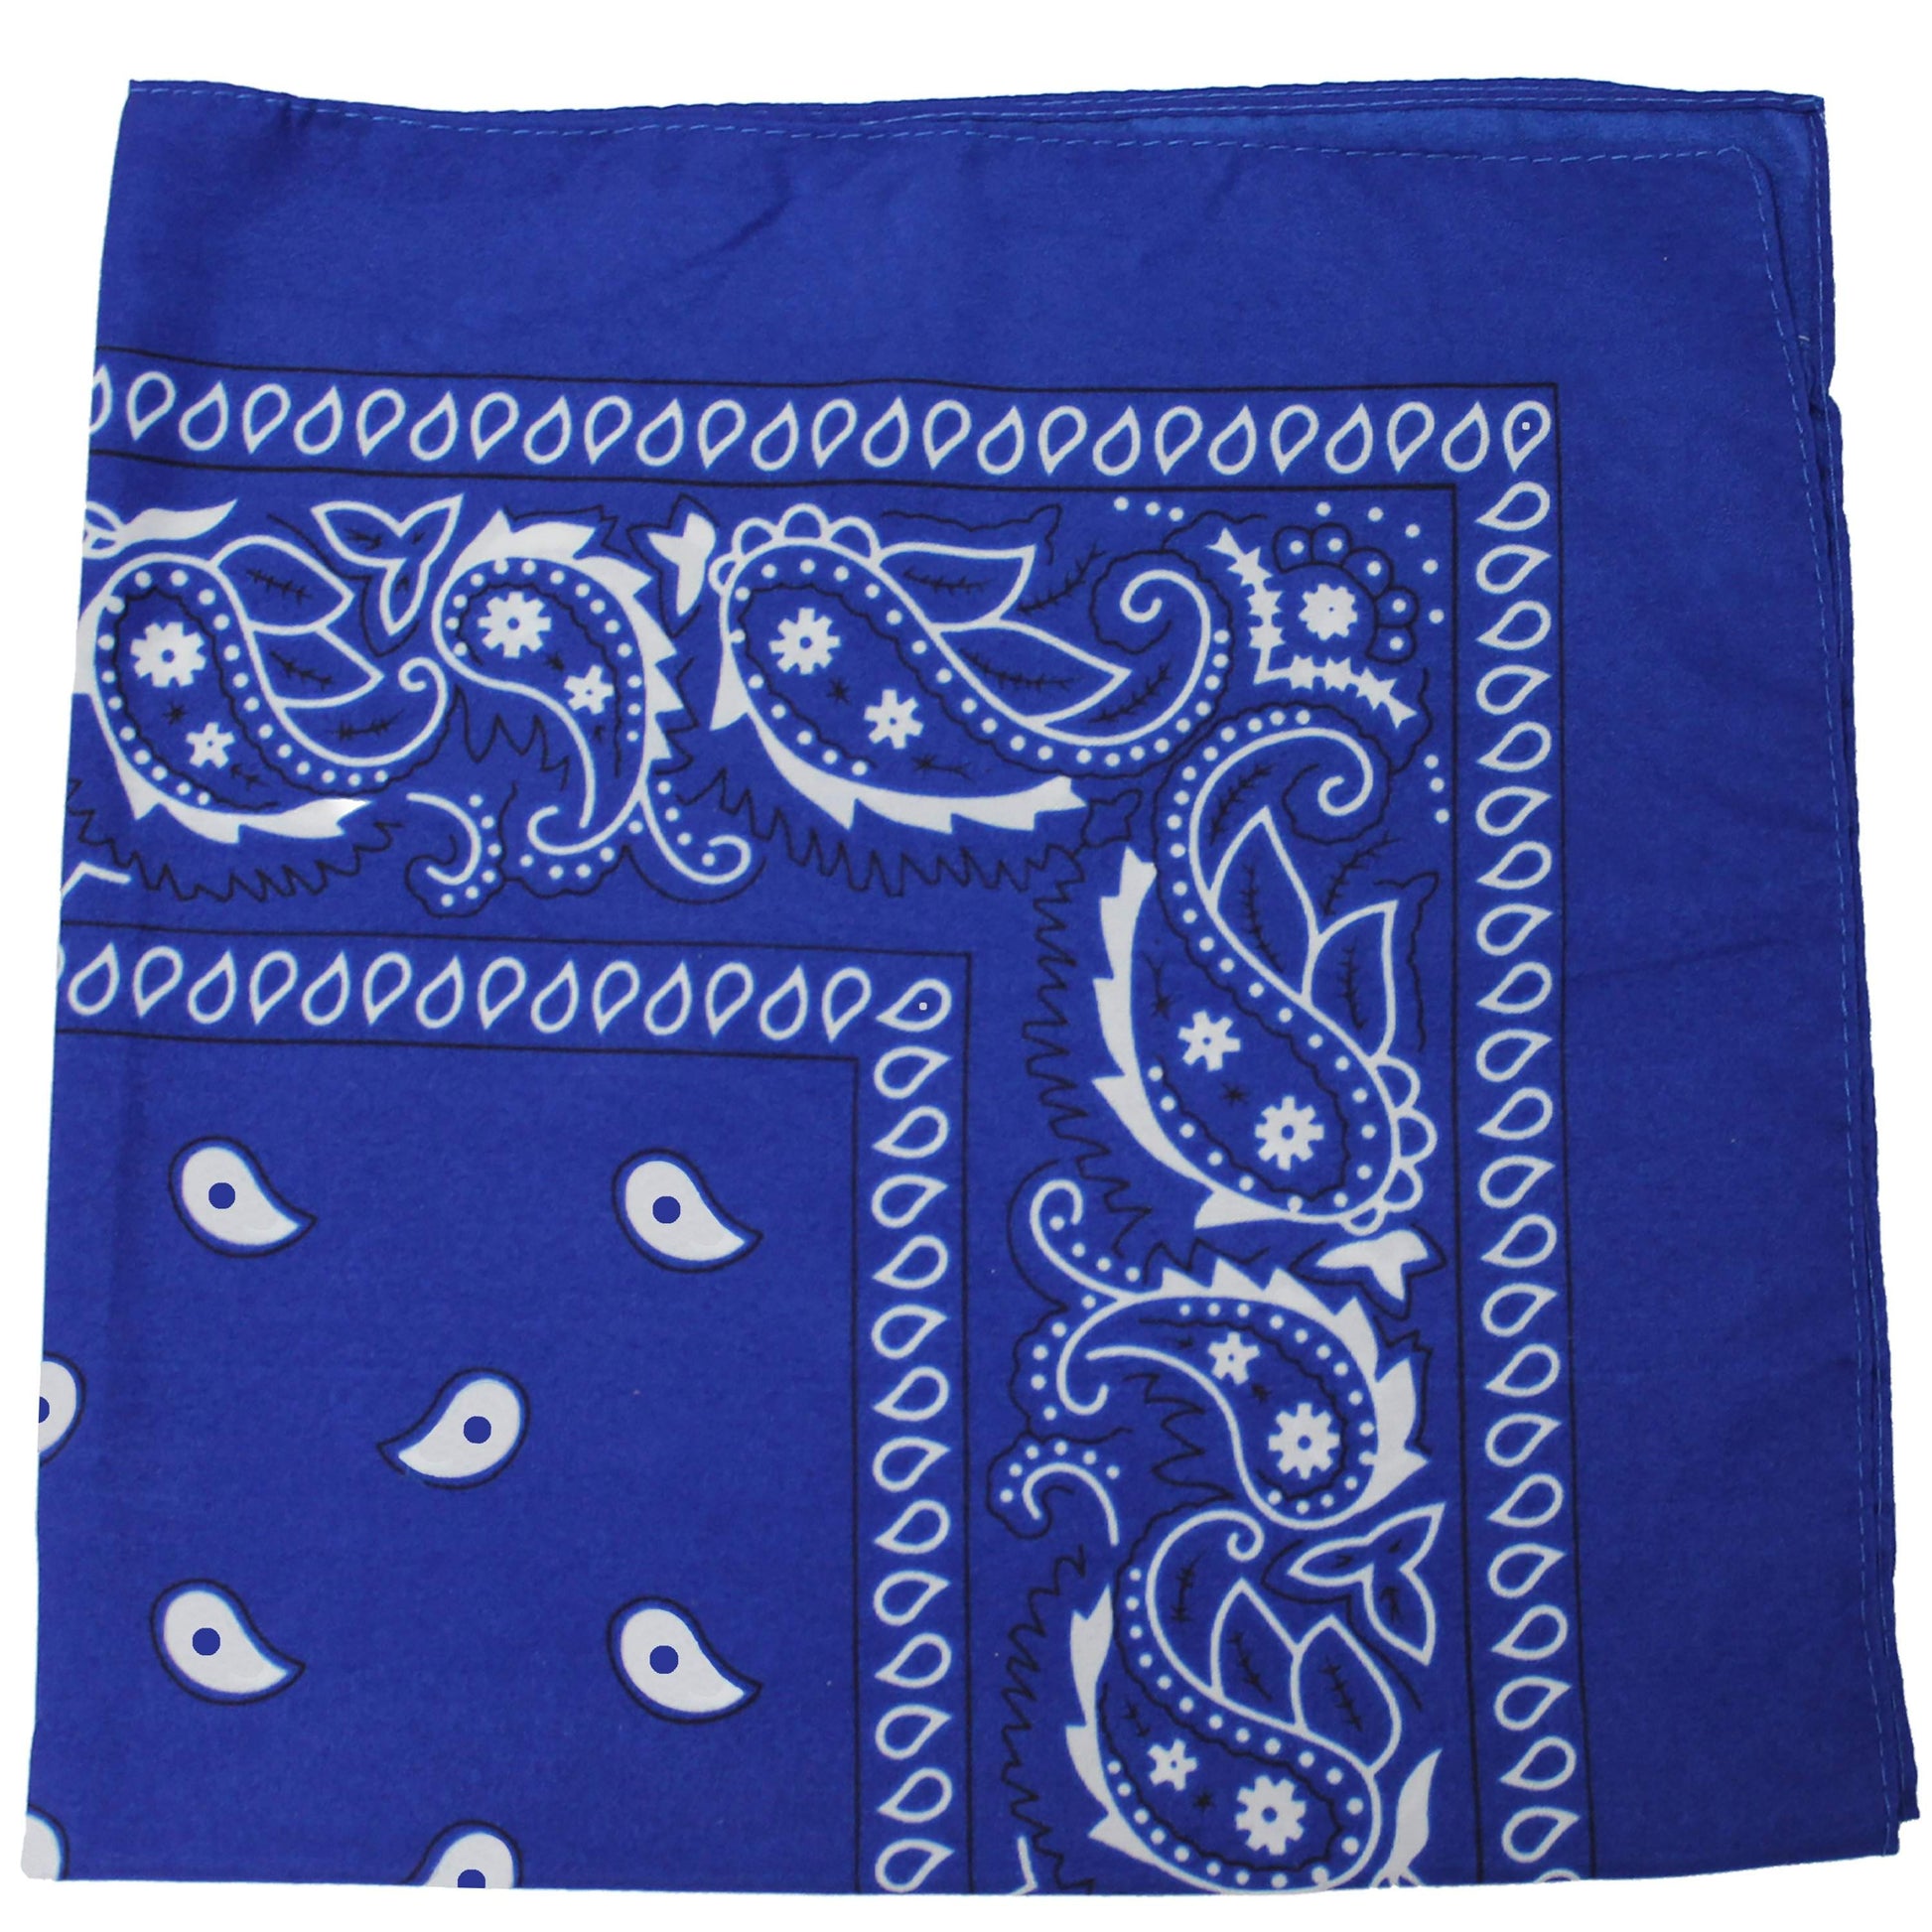 Qraftsy Extra Large Edition Kerchiefs Cotton - Paisley and Solid